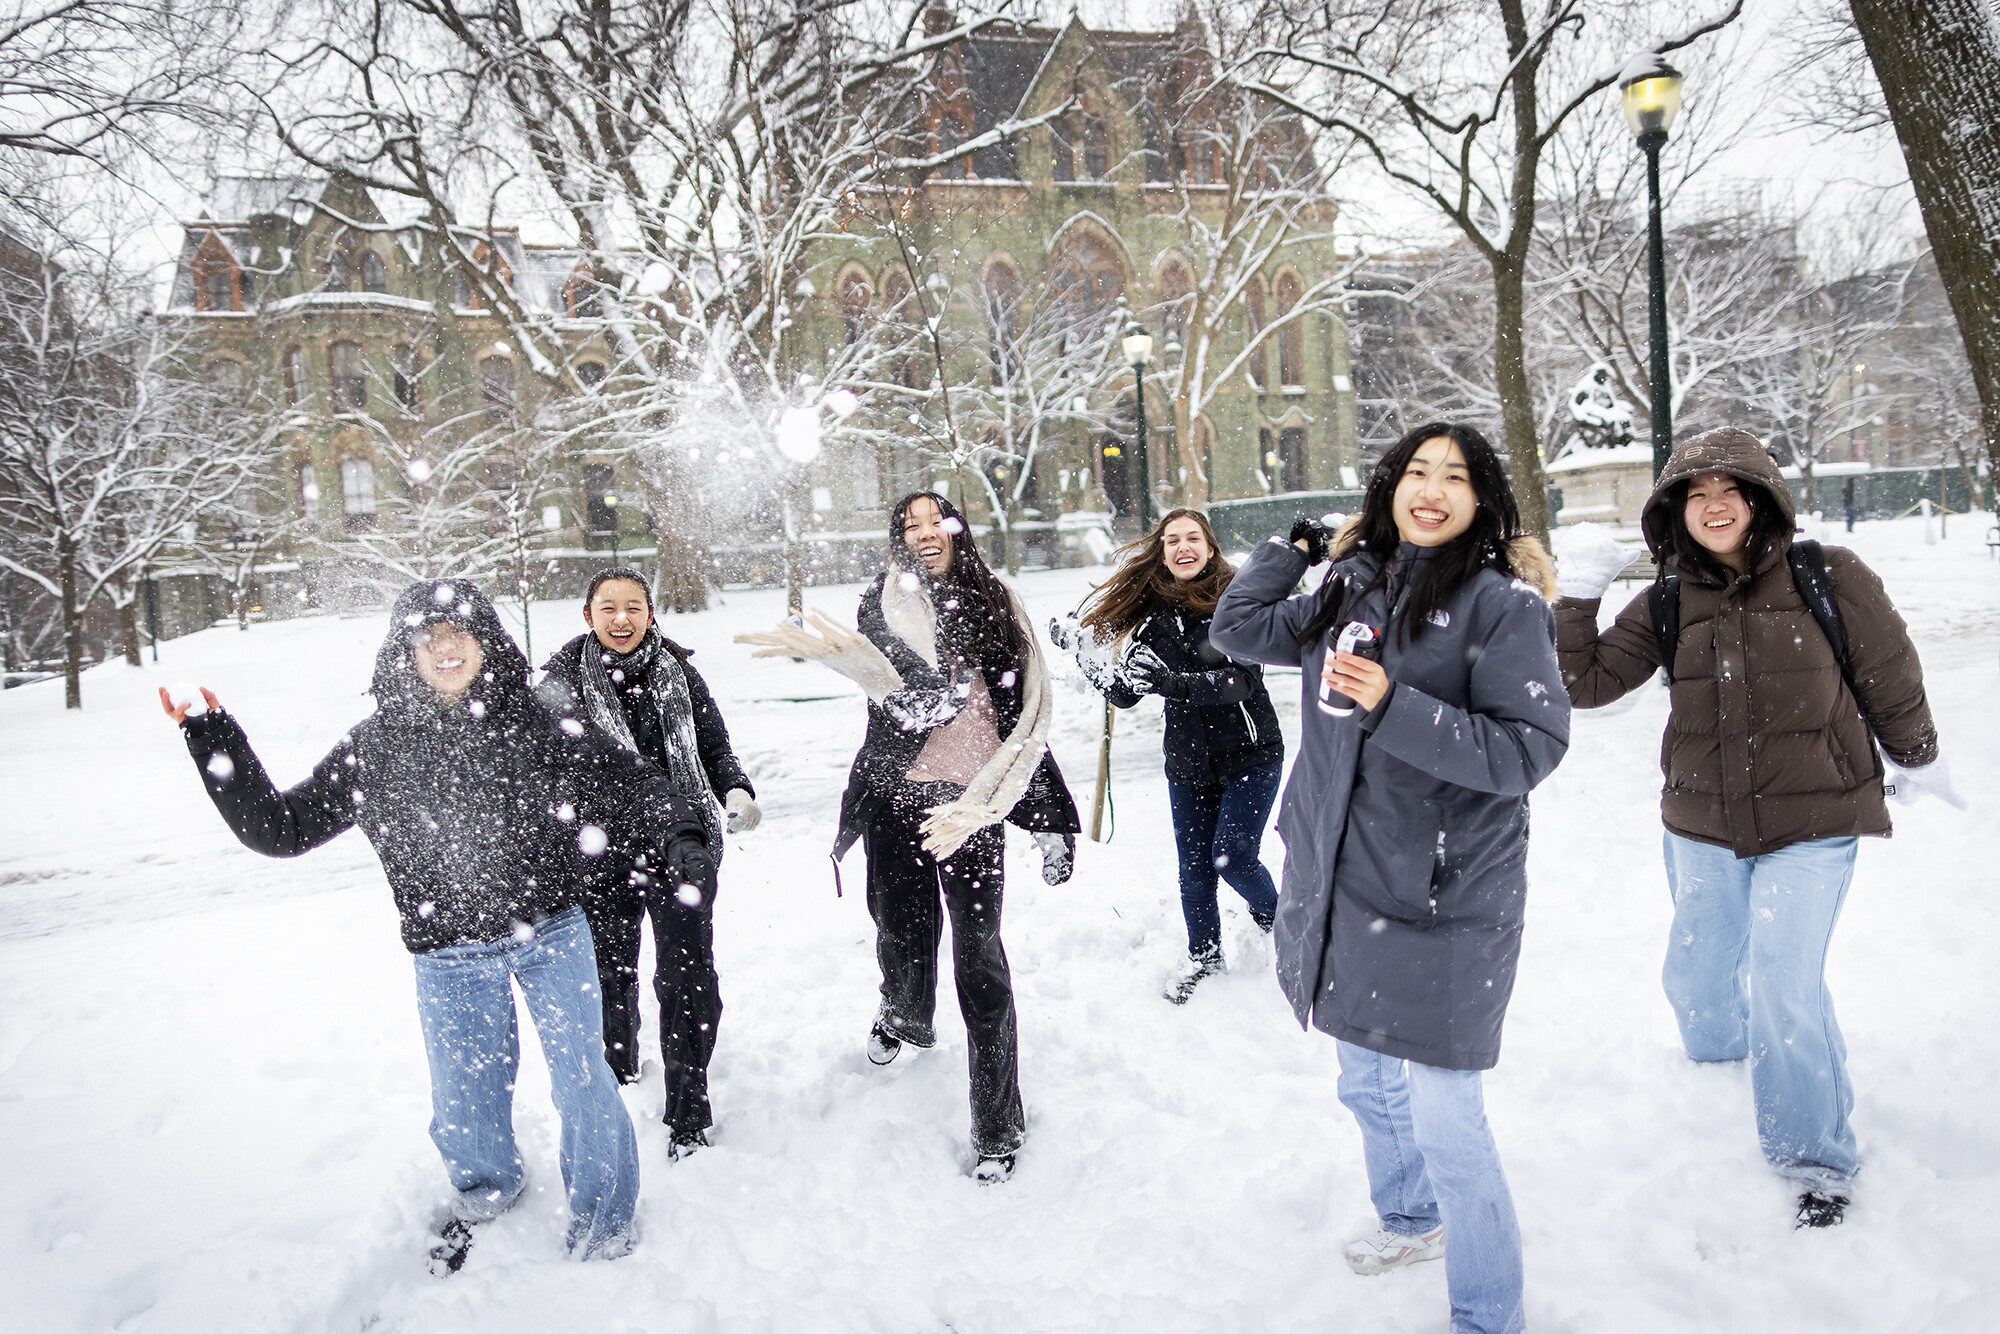 snowball fight on campus during a snow day